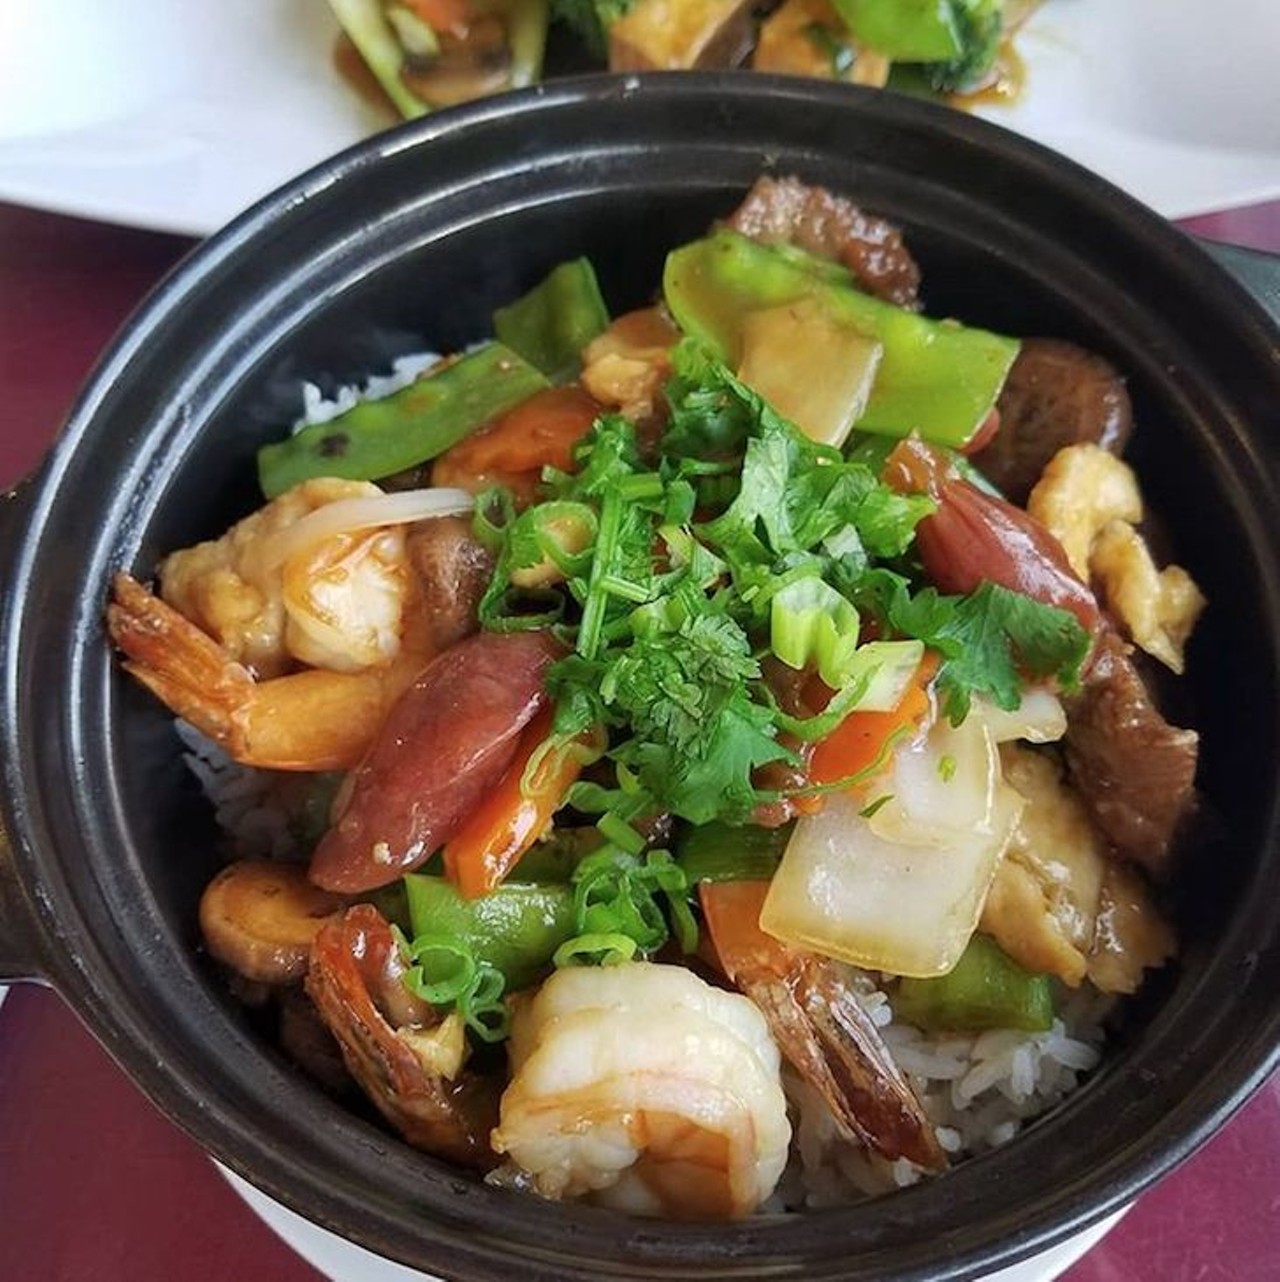 Four Guys Pho
505 FL-436, Casselberry, (407) 755-6670
Created by four brothers, this Vietnamese restaurant specializes in not only pho but also traditional dishes to the culture. From egg noodle soup to vegetarian tofu dishes, there is something for everyone at this spot.
Photo via clwarder/Instagram